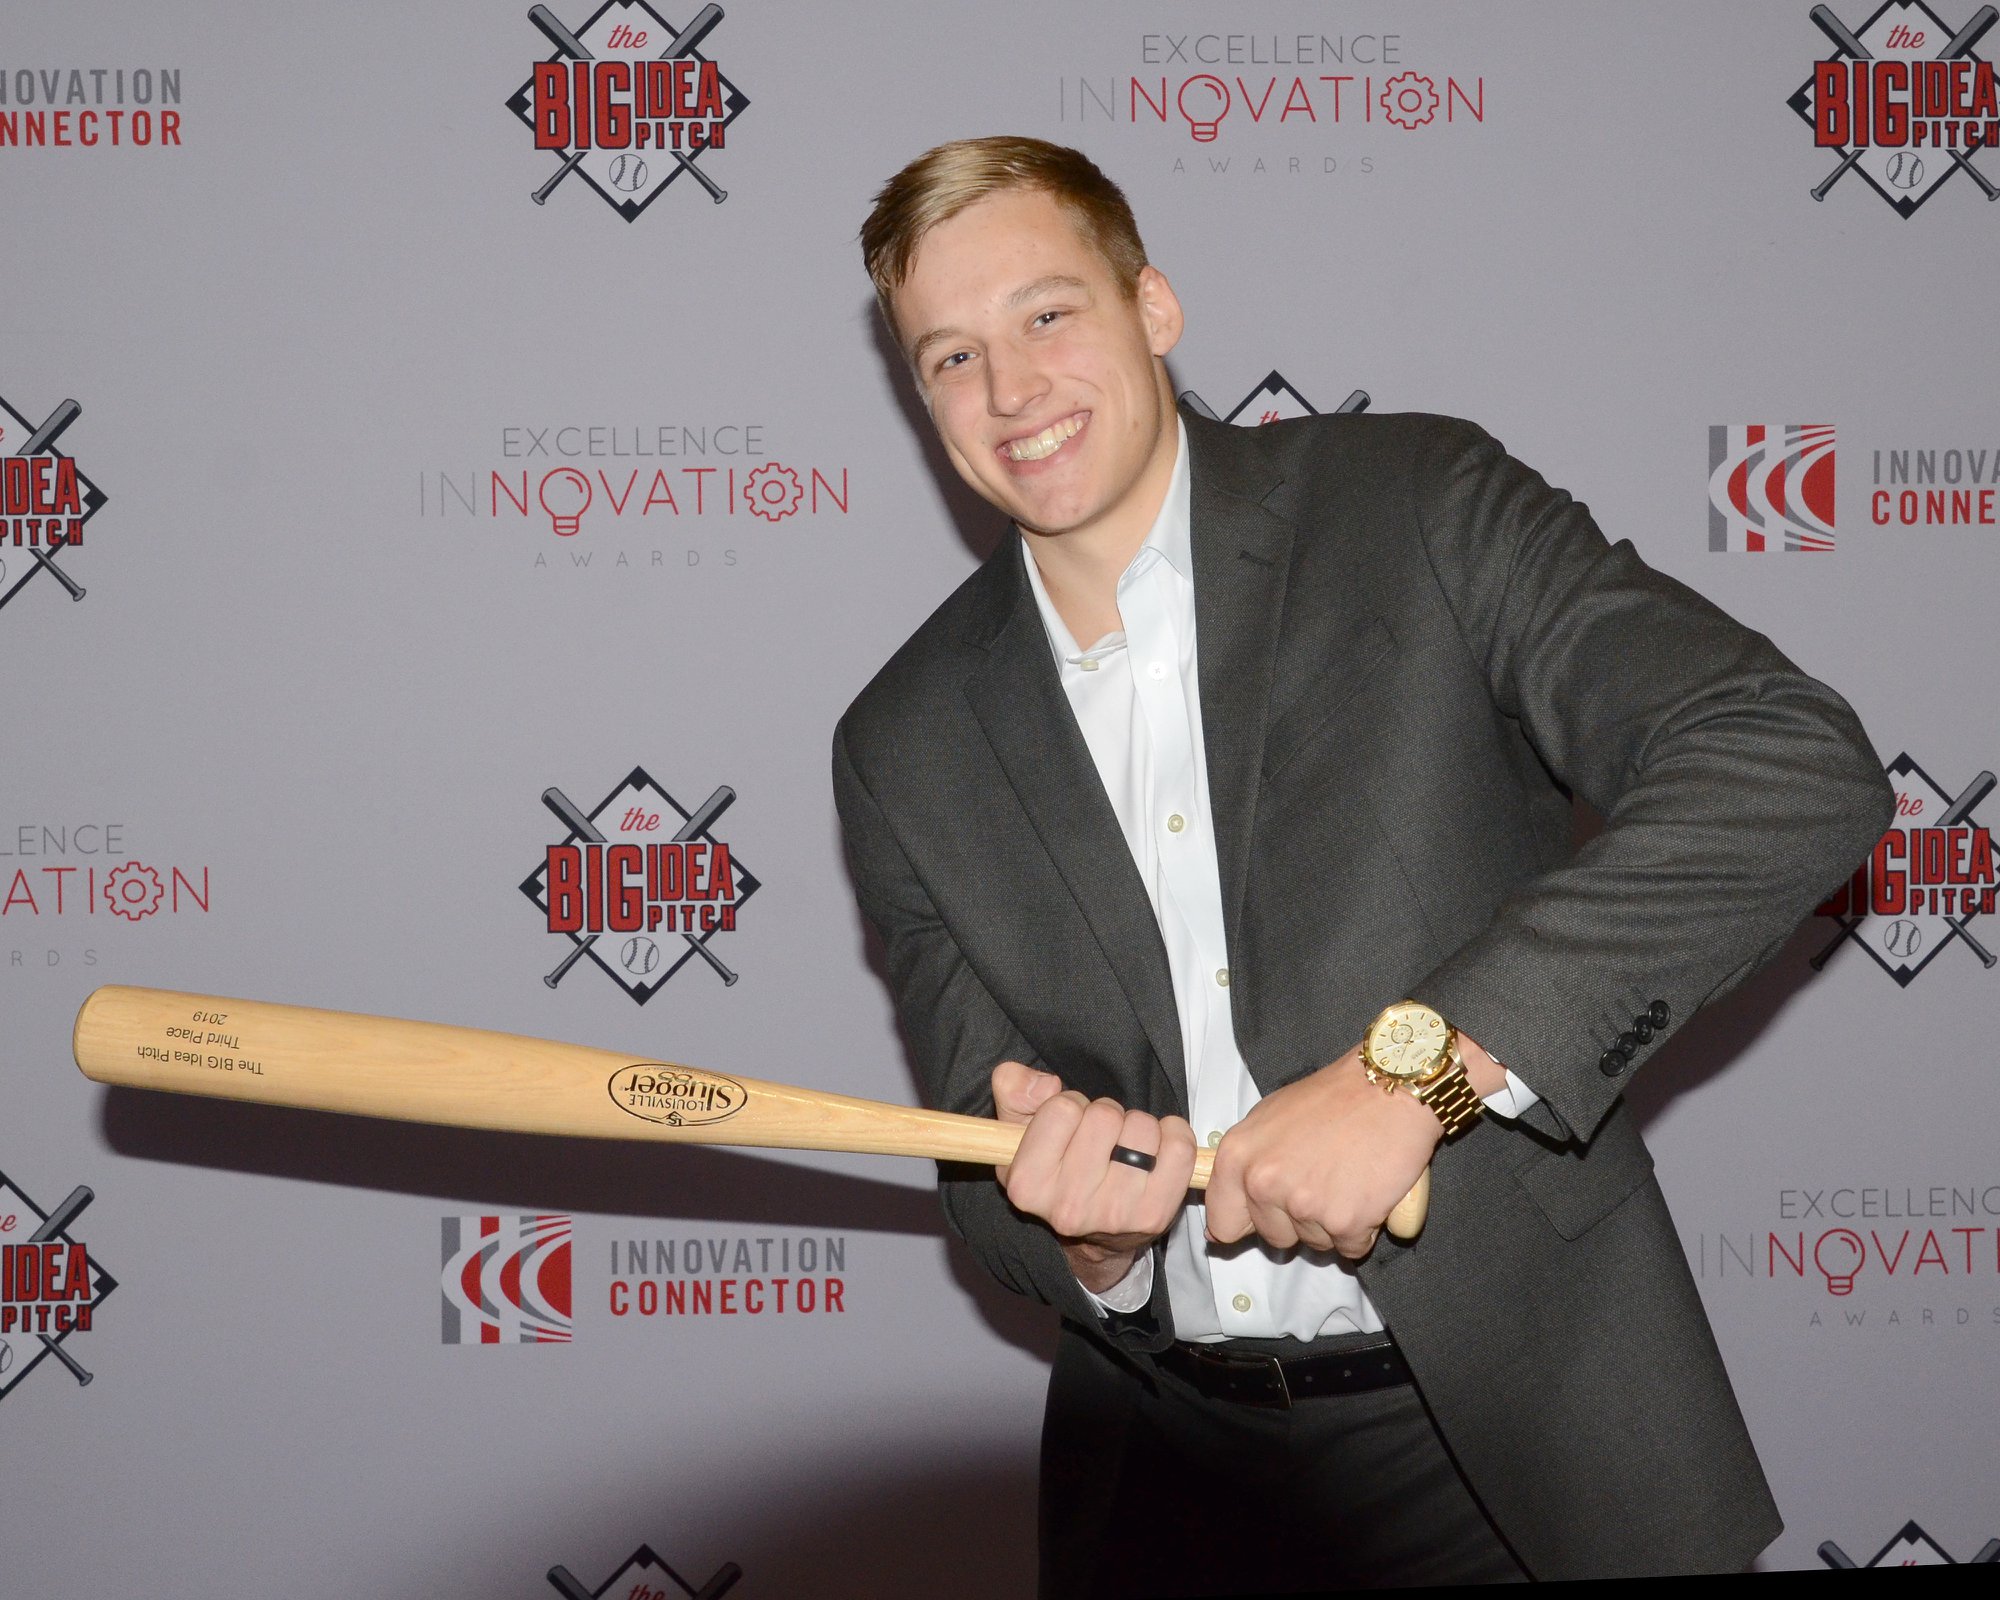 <strong><span style="color: #ff0000;">Third Place Winner of the BIG Idea Pitch 2019 Competition, Carter Anderson</span></strong>